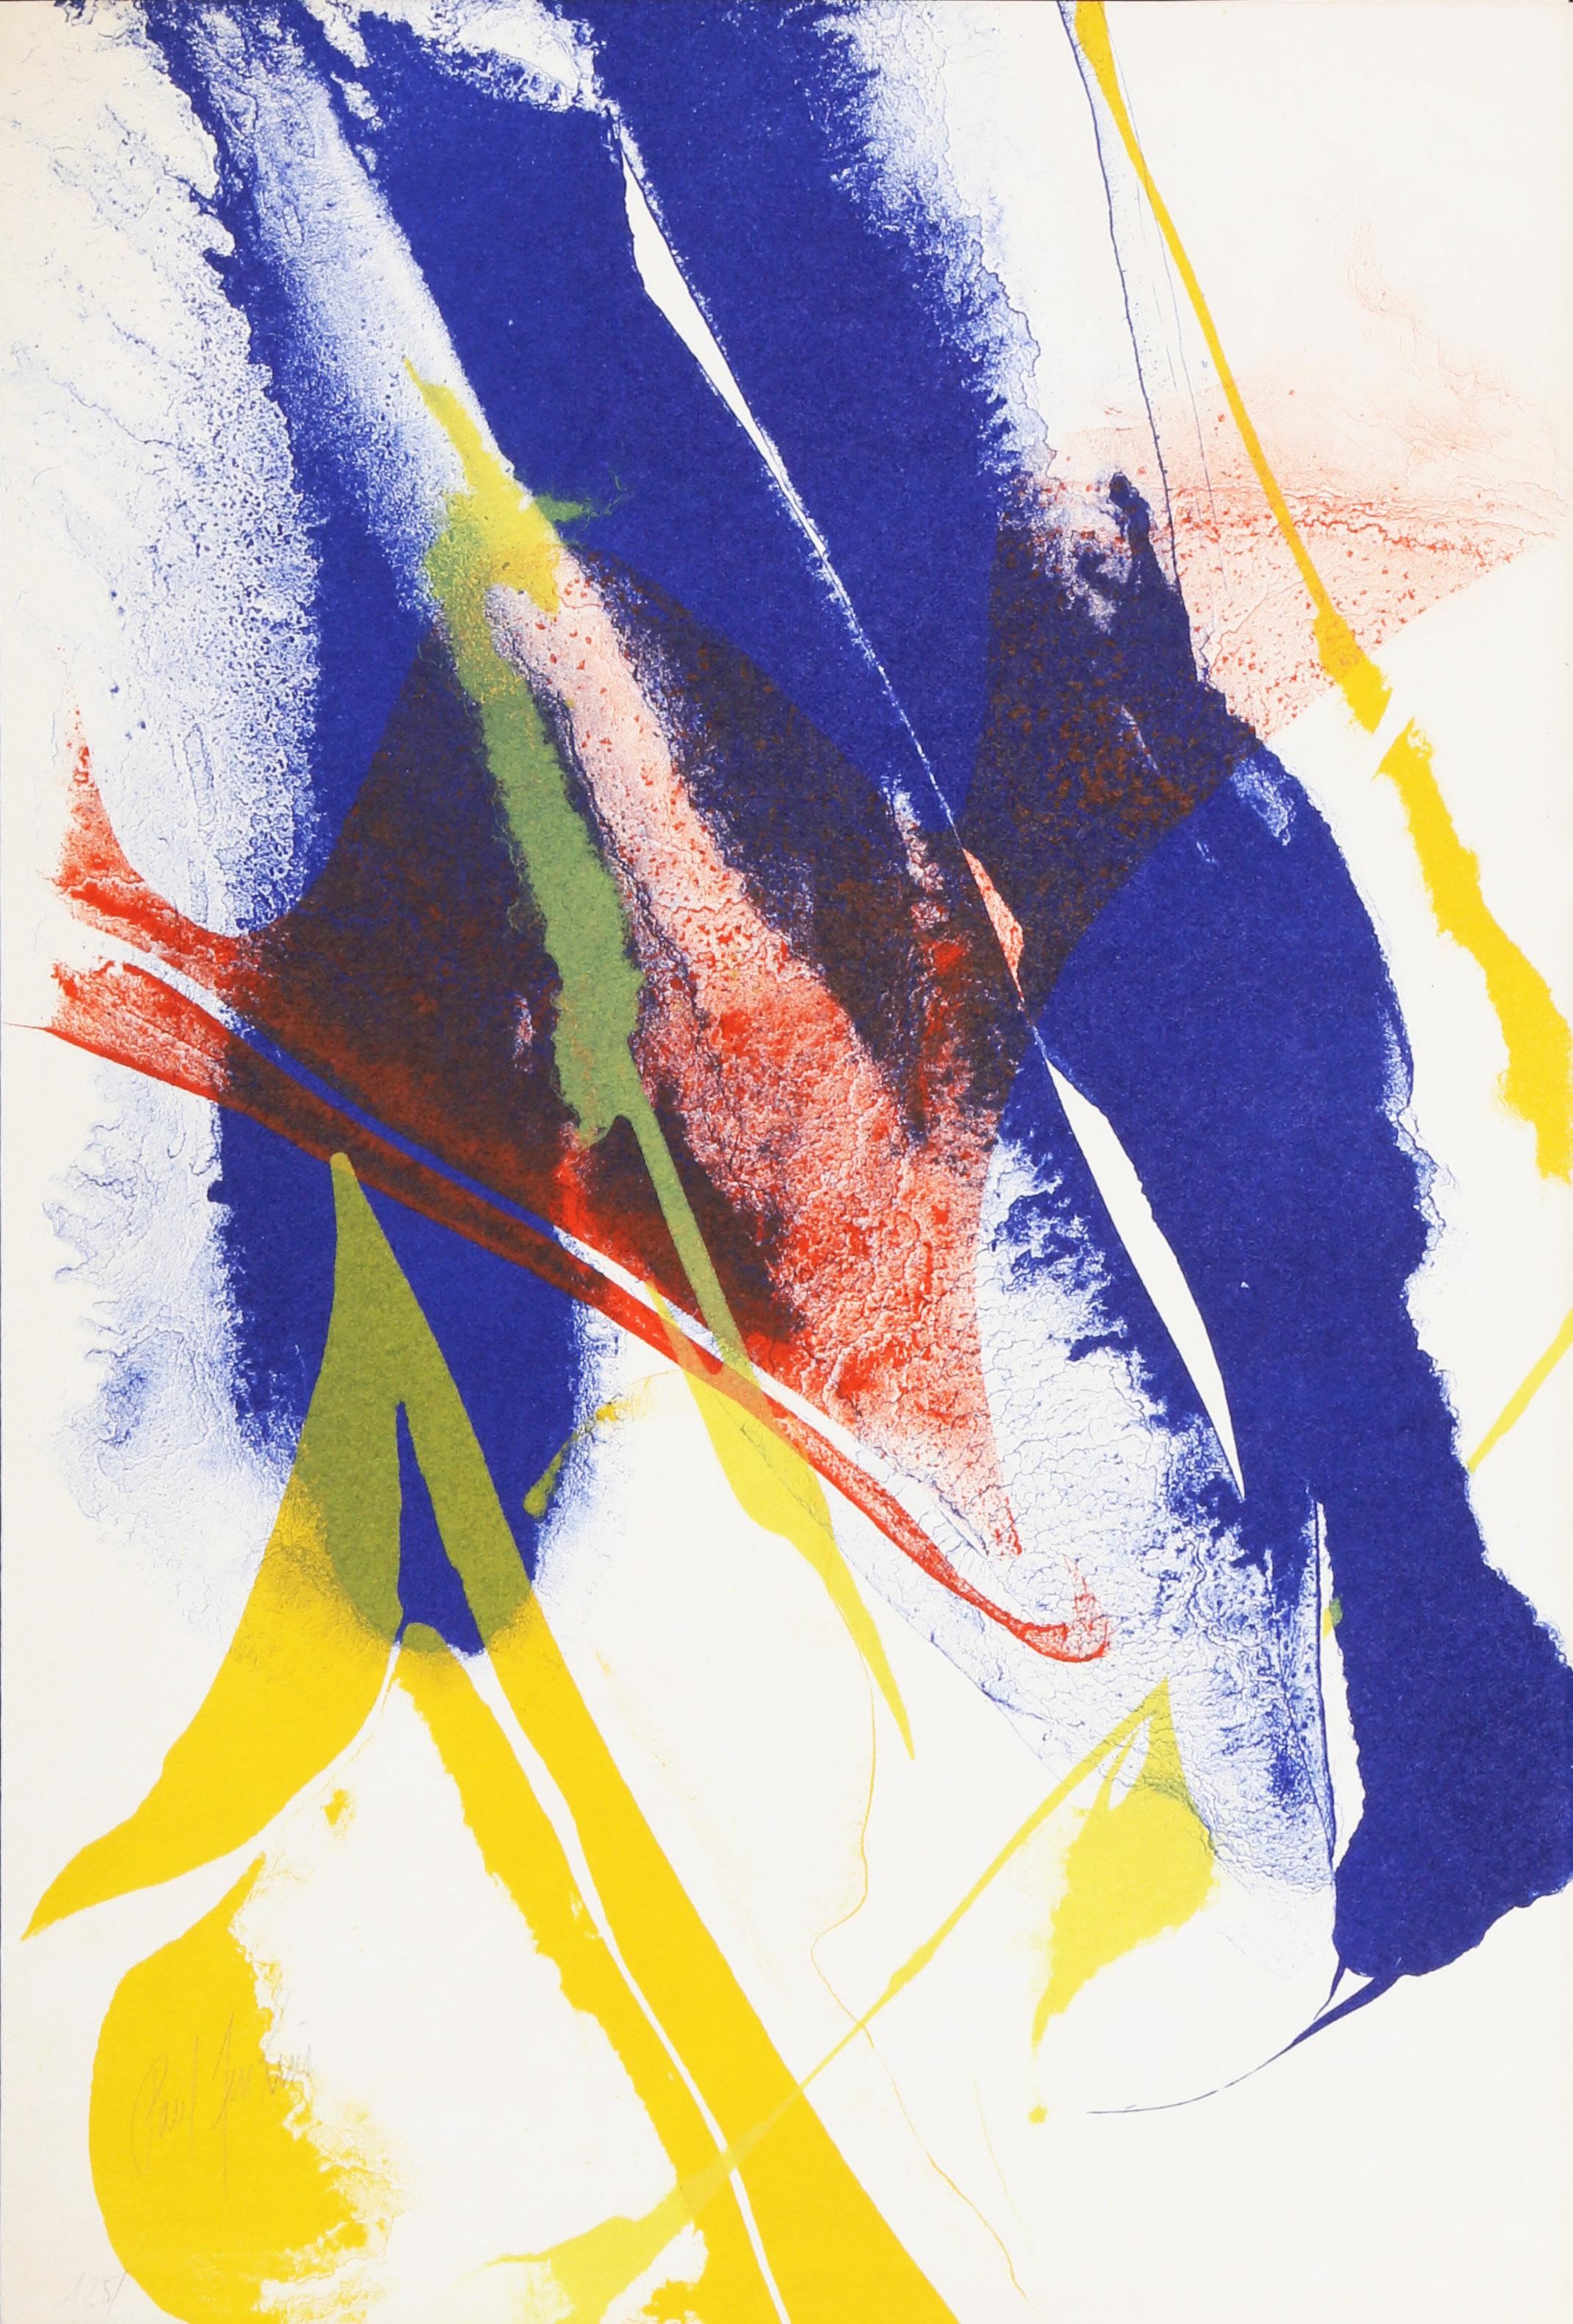 A lithograph from the portfolio "Seeing Voices", a collection that also includes several poems. This abstract piece by Paul Jenkins is signed and numbered on the front of the print in pencil.

Seeing Voices 4
Paul Jenkins, American